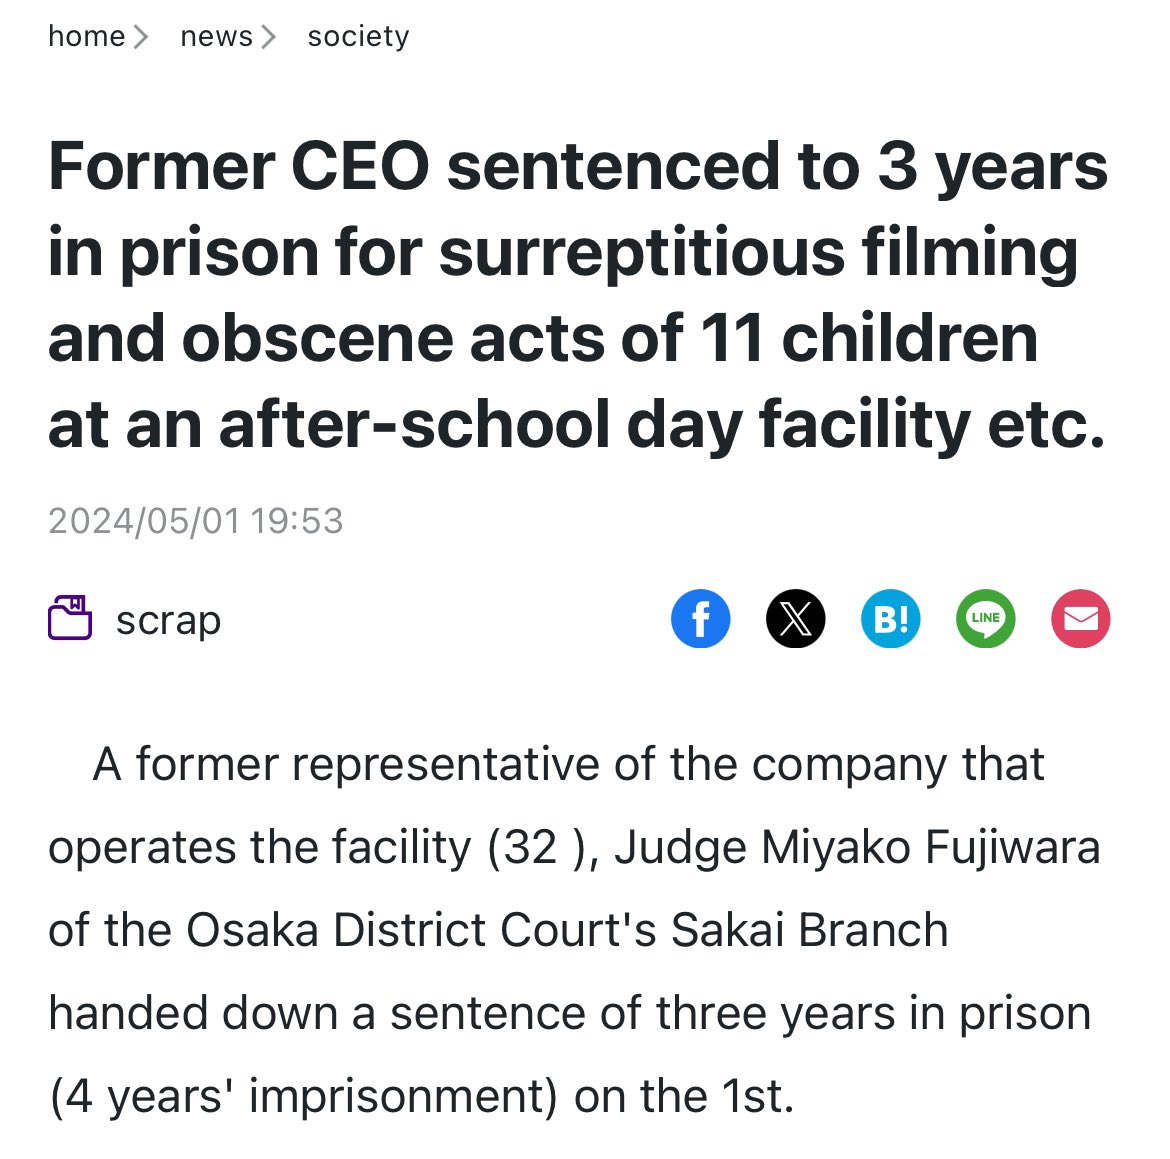 Yes, and this is also true in Japan. In Japan, a childcare worker who sexually assaulted 18 girls is only imprisoned for 5 years. And the CEO who sexually assaulted 11 disabled children in his own facility is only serving 3 years in prison. This is the reality in Japan.